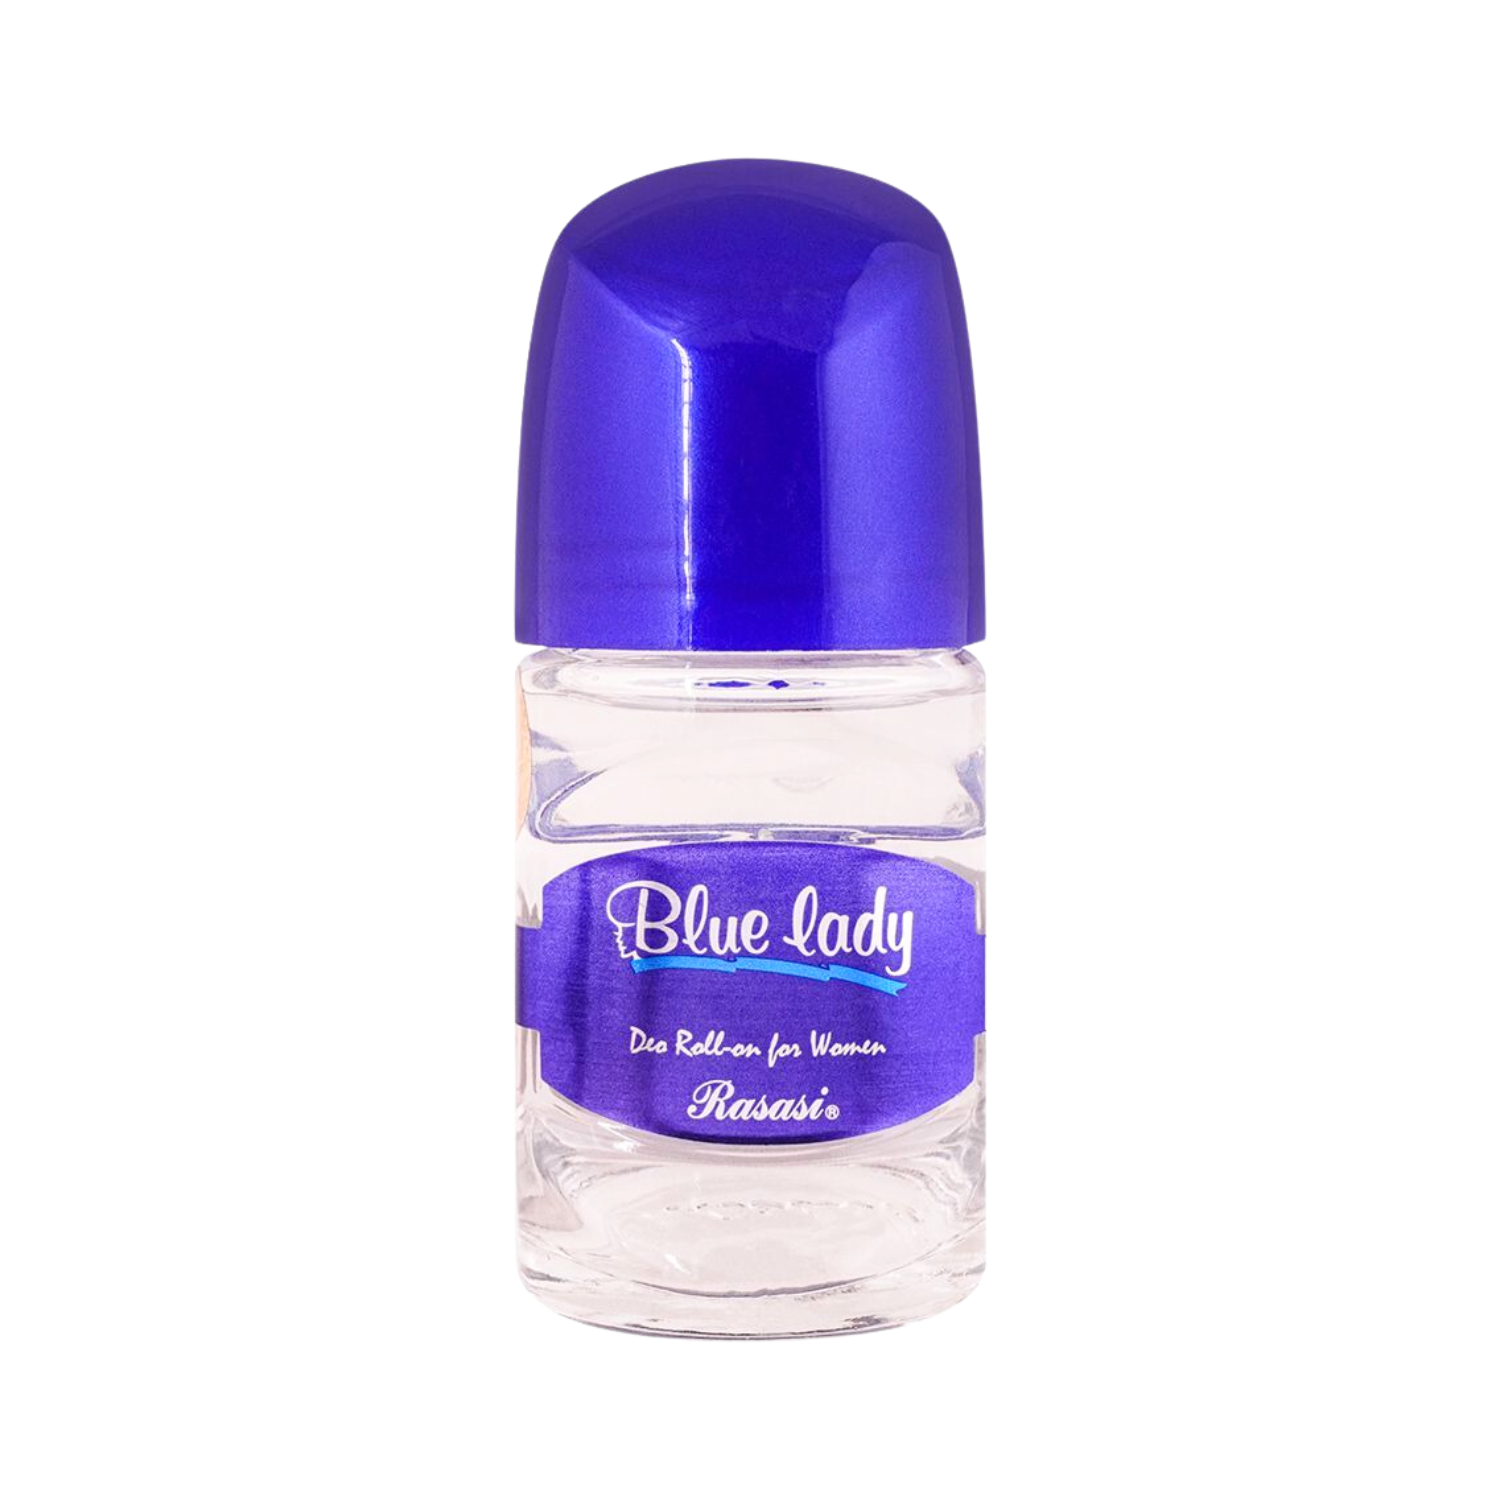 rasasi-blue-lady-deo-roll-on-for-women-50ml